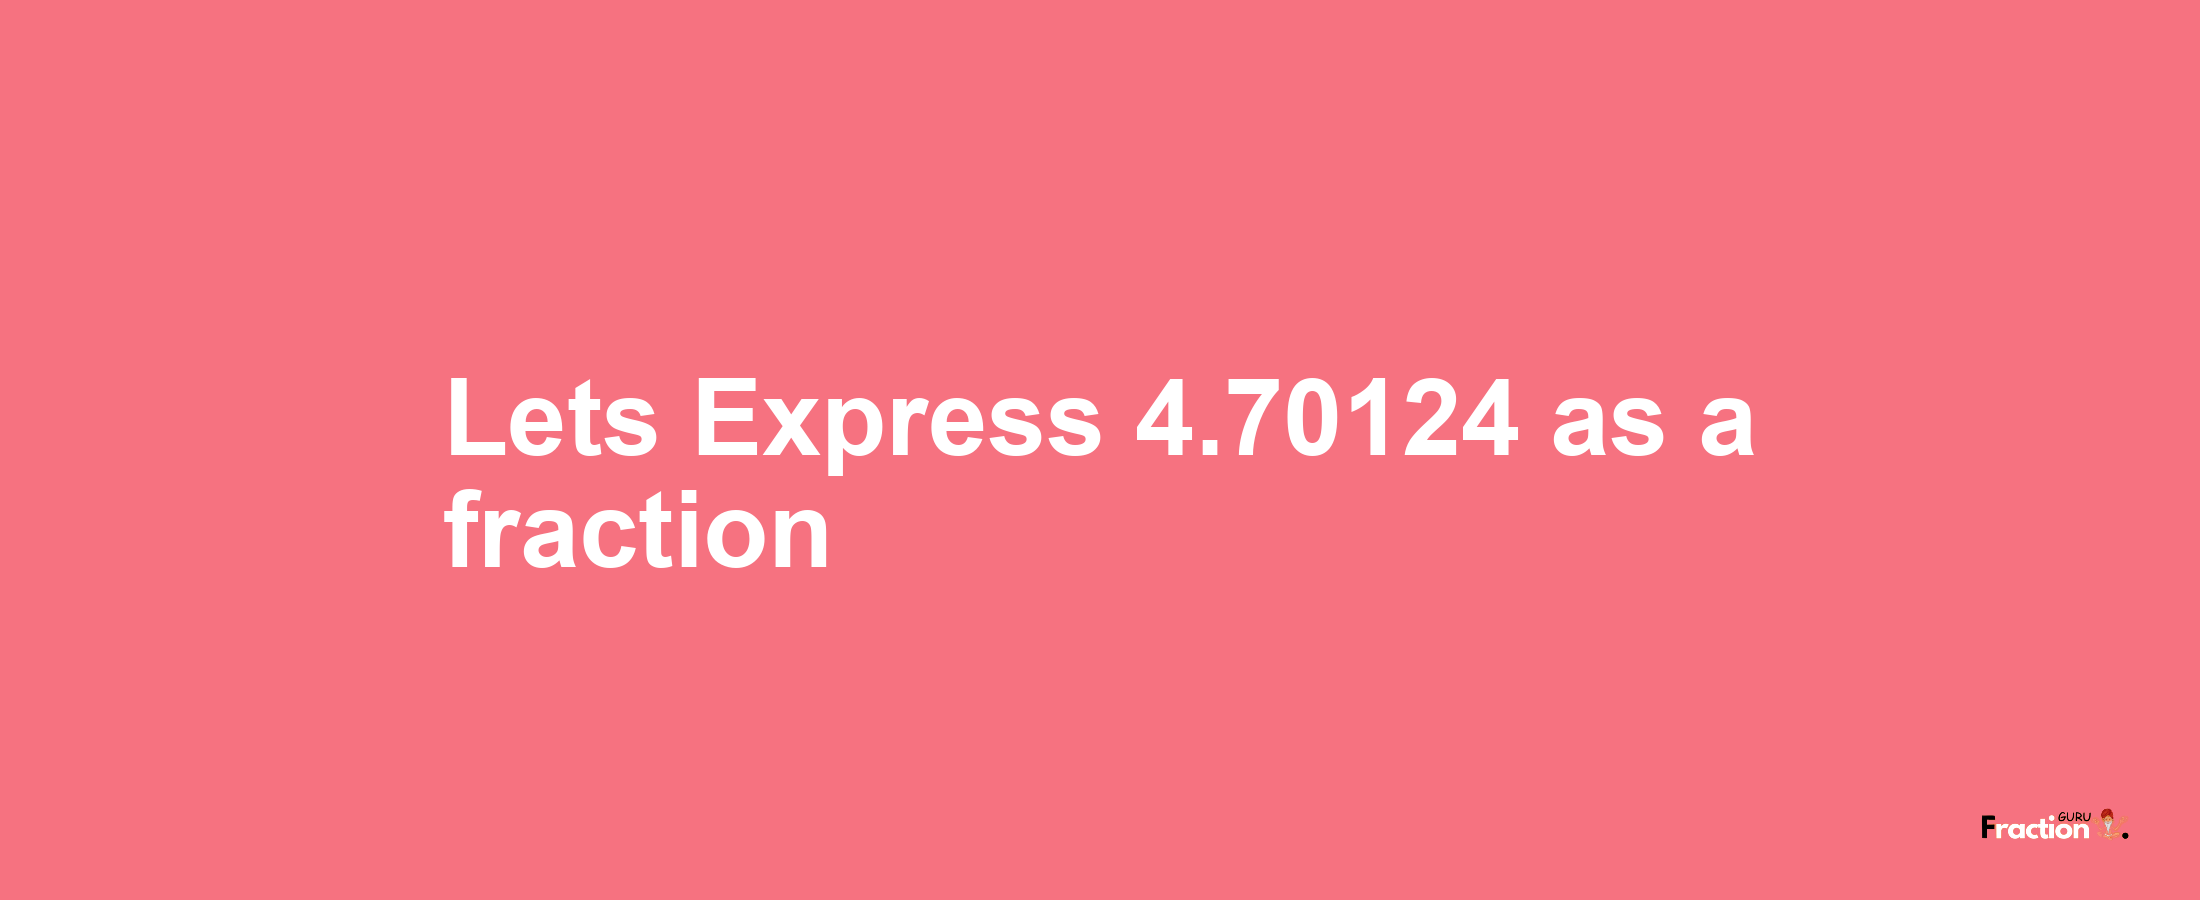 Lets Express 4.70124 as afraction